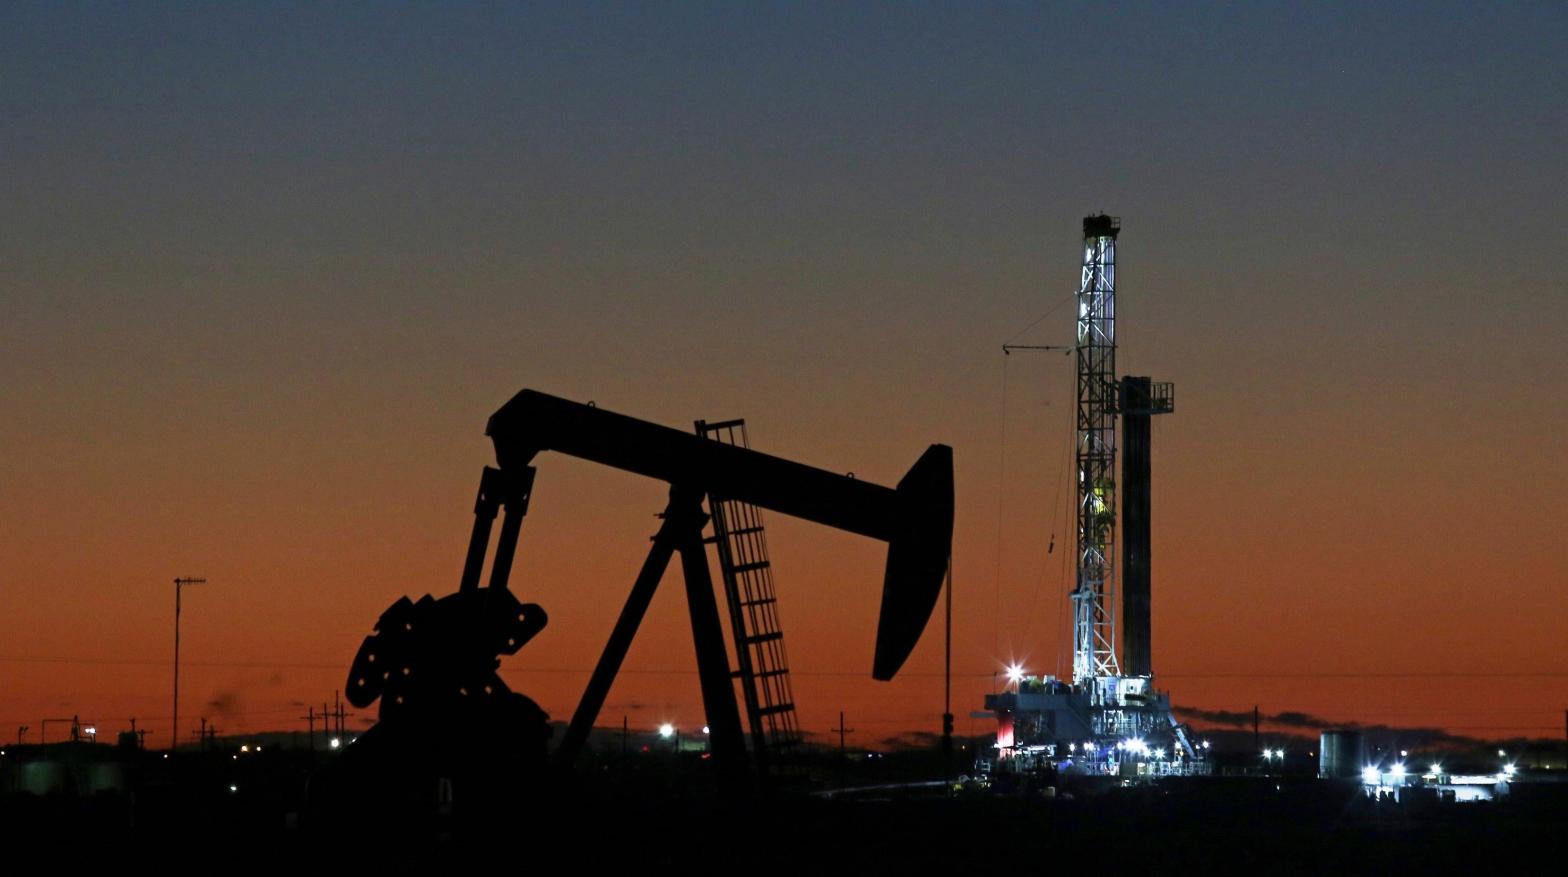 An oil rig and pump jack in Midland, Texas. (Photo: Jacob Ford/Odessa American, AP)